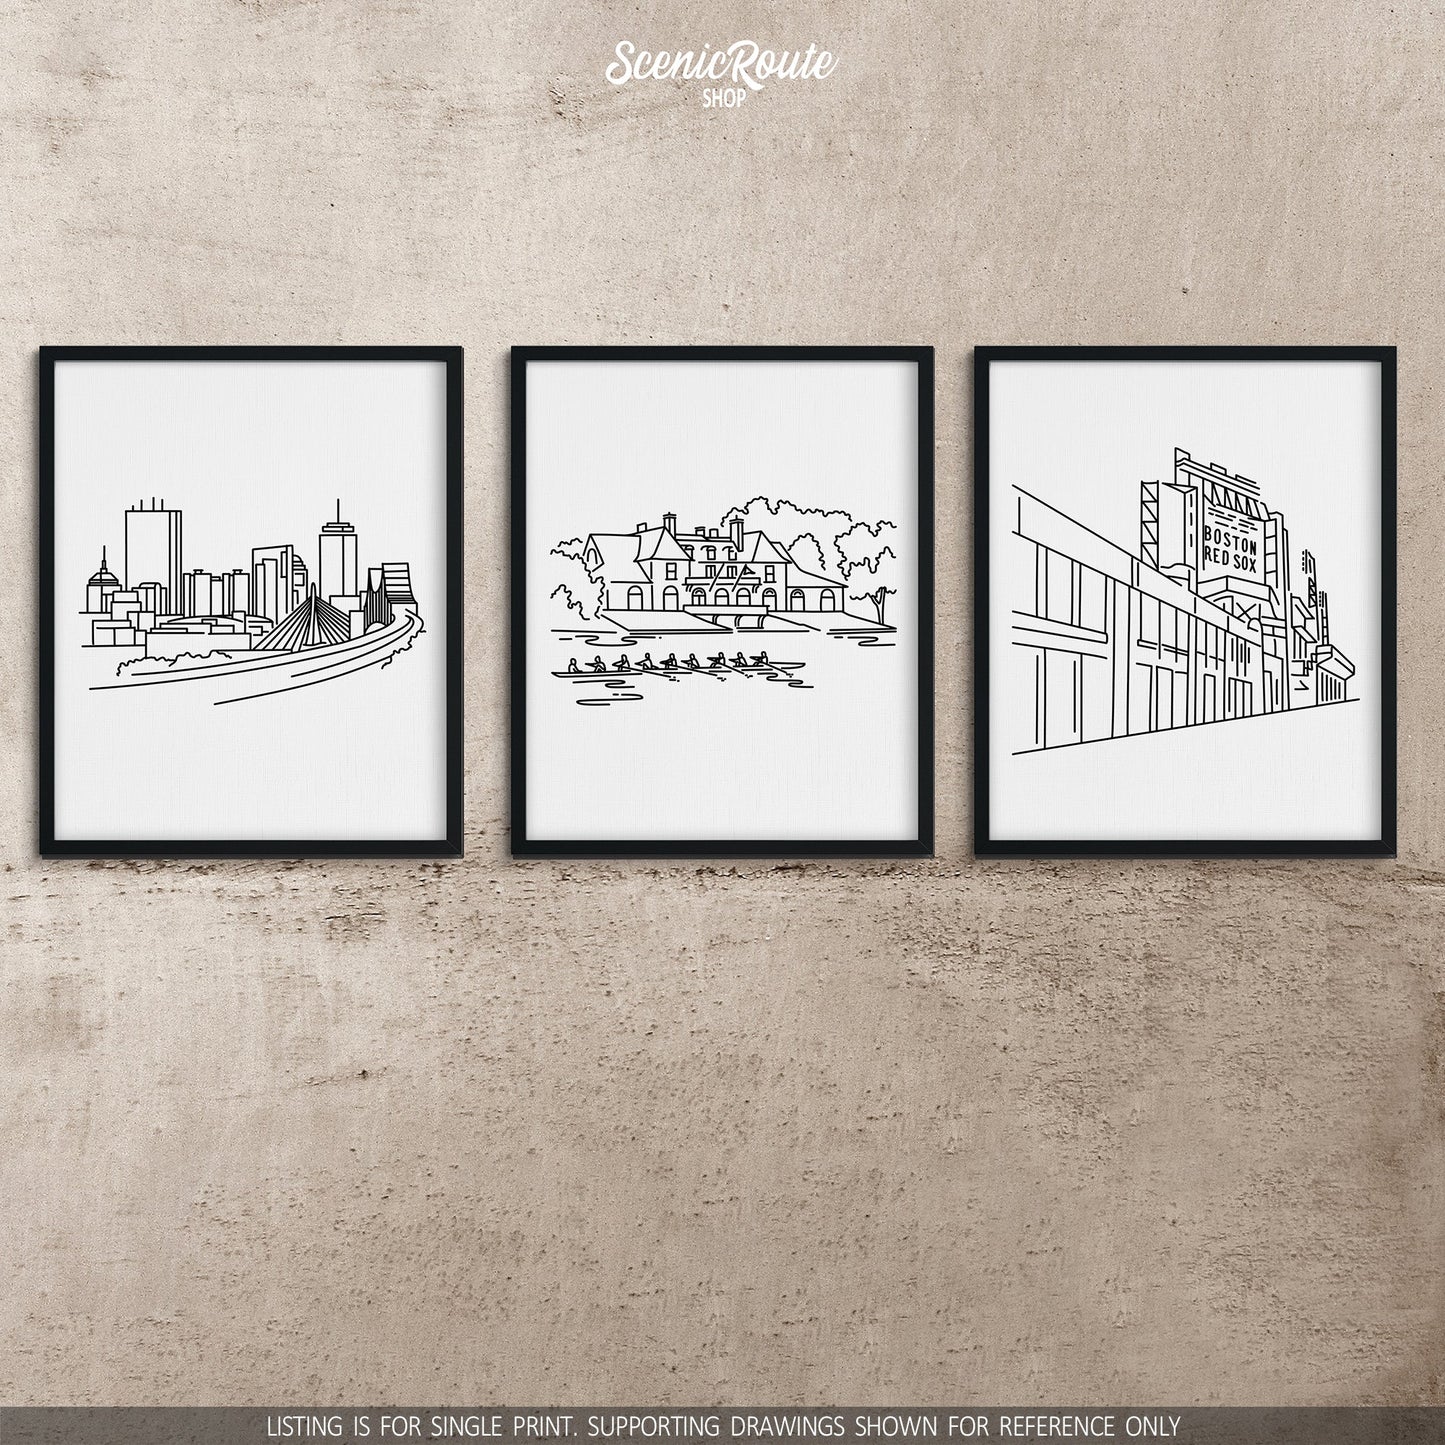 A group of three framed drawings on a concrete wall. The line art drawings include the Boston Skyline, Harvard Boathouse, and Fenway Park